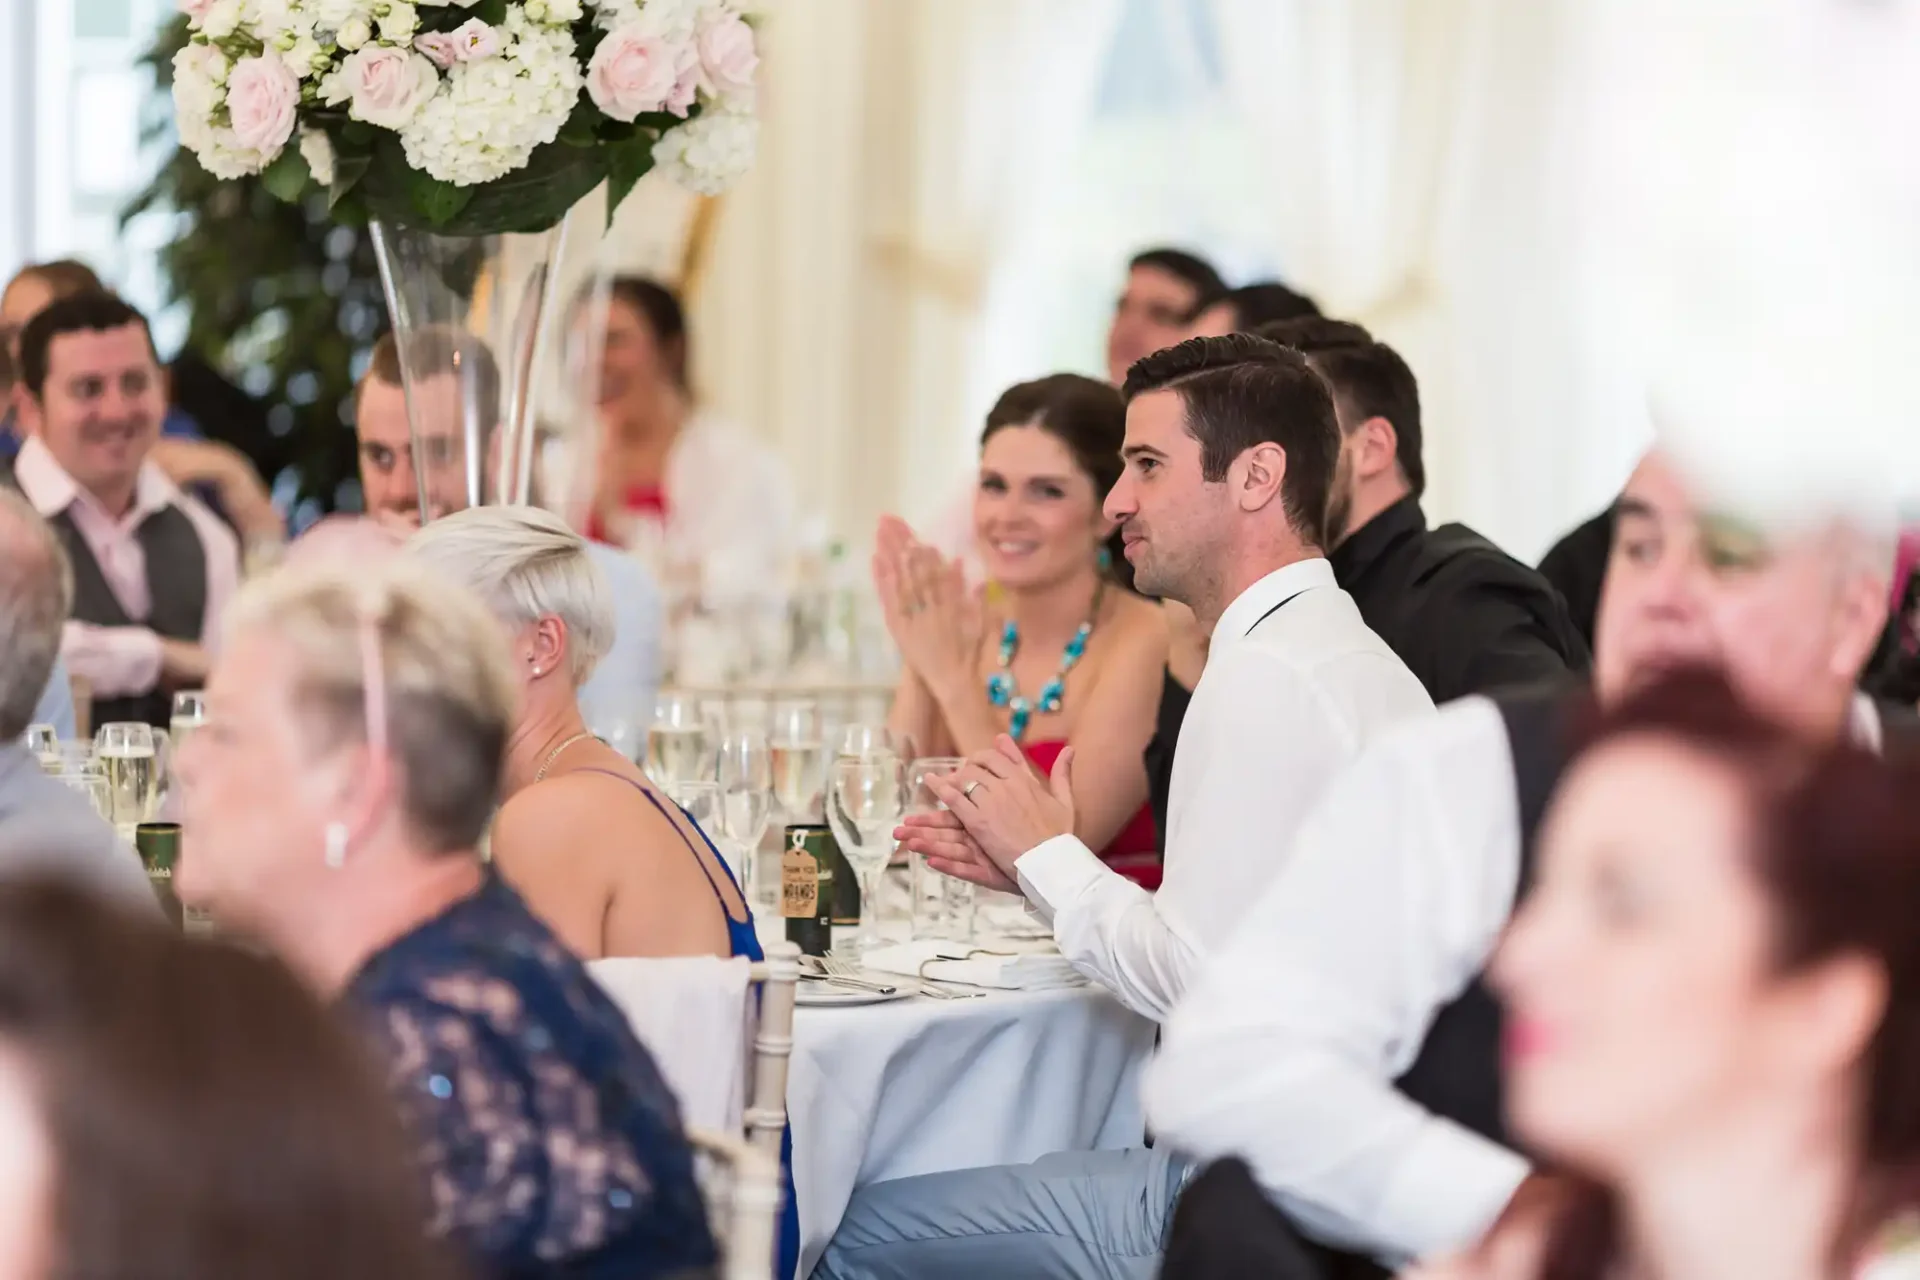 Guests seated at tables, enjoying a conversation during a formal event, with focus on a man in a white shirt.